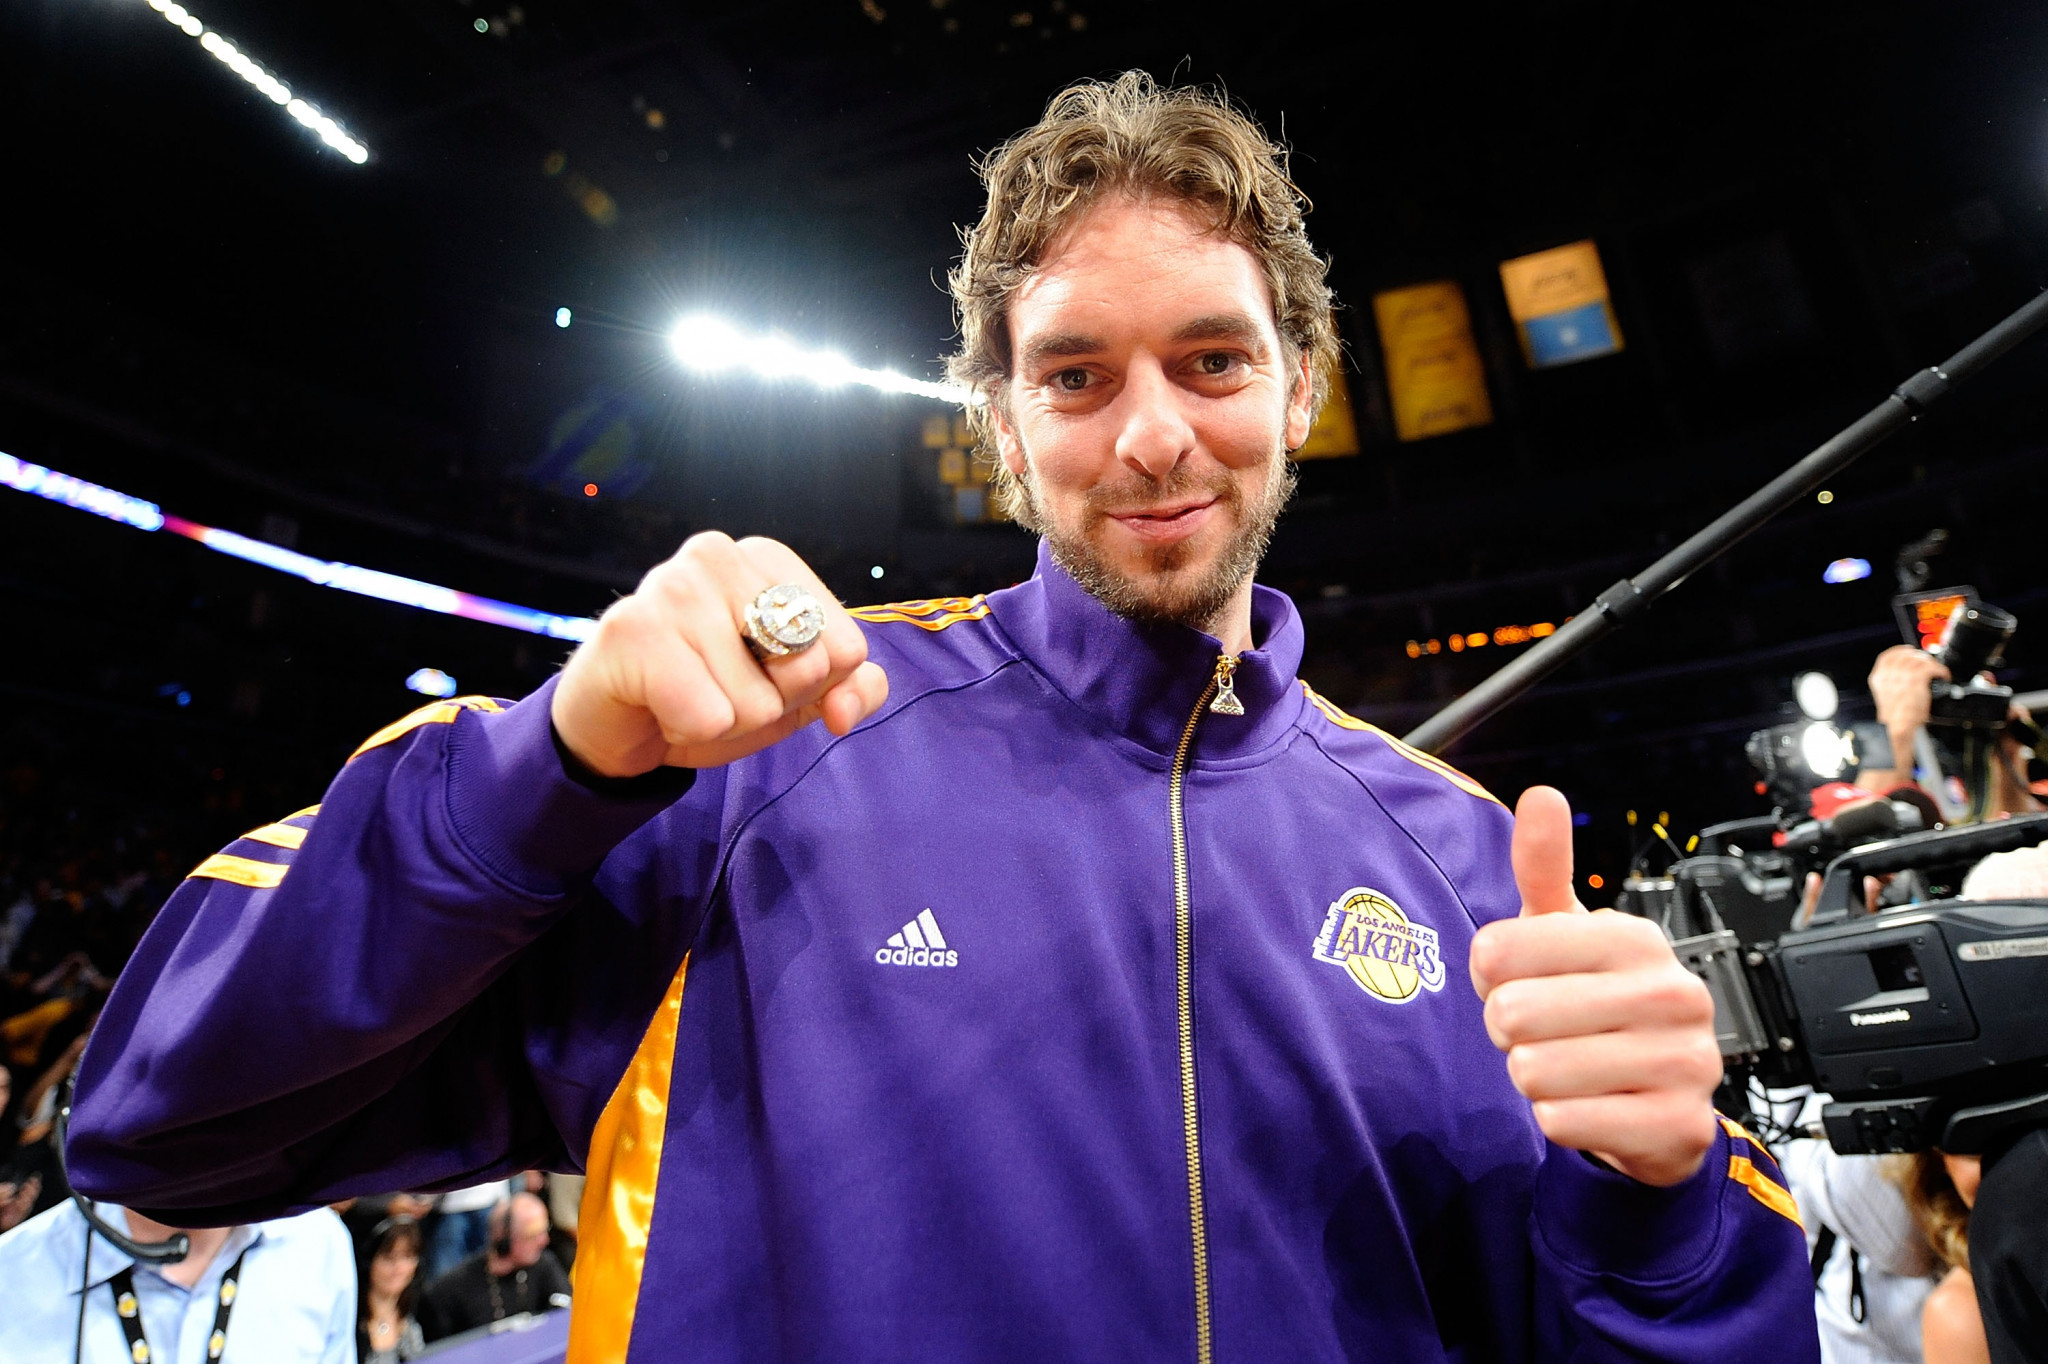 Pau Gasol Sáez, the Spanish dual Olympic silver medal-winning basketball player, remains at the top of the pile ©Getty Images